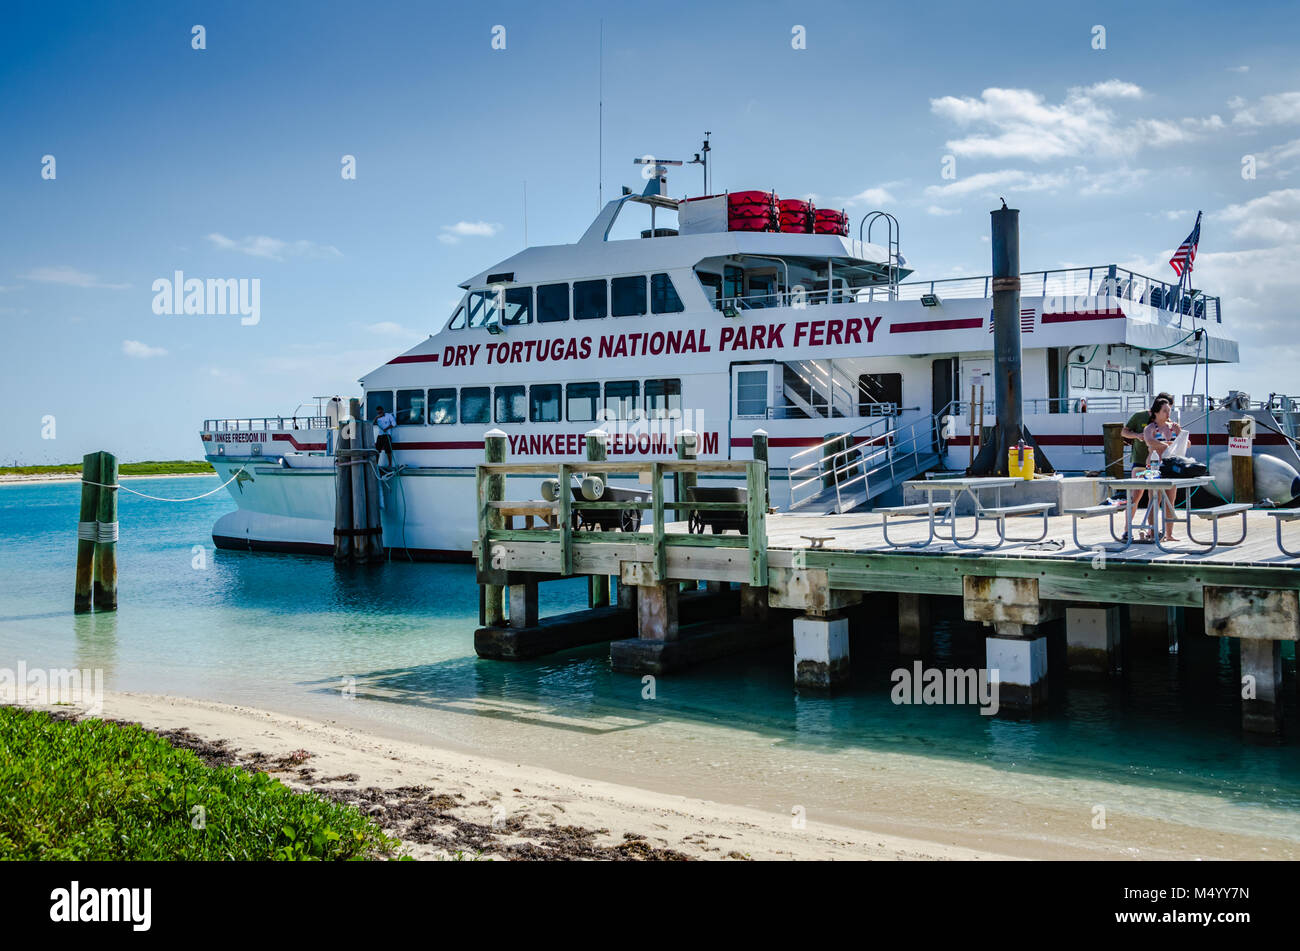 Yankee Freedom Ferry docked in Dry Tortugas National Park in the Florida Keys. Stock Photo